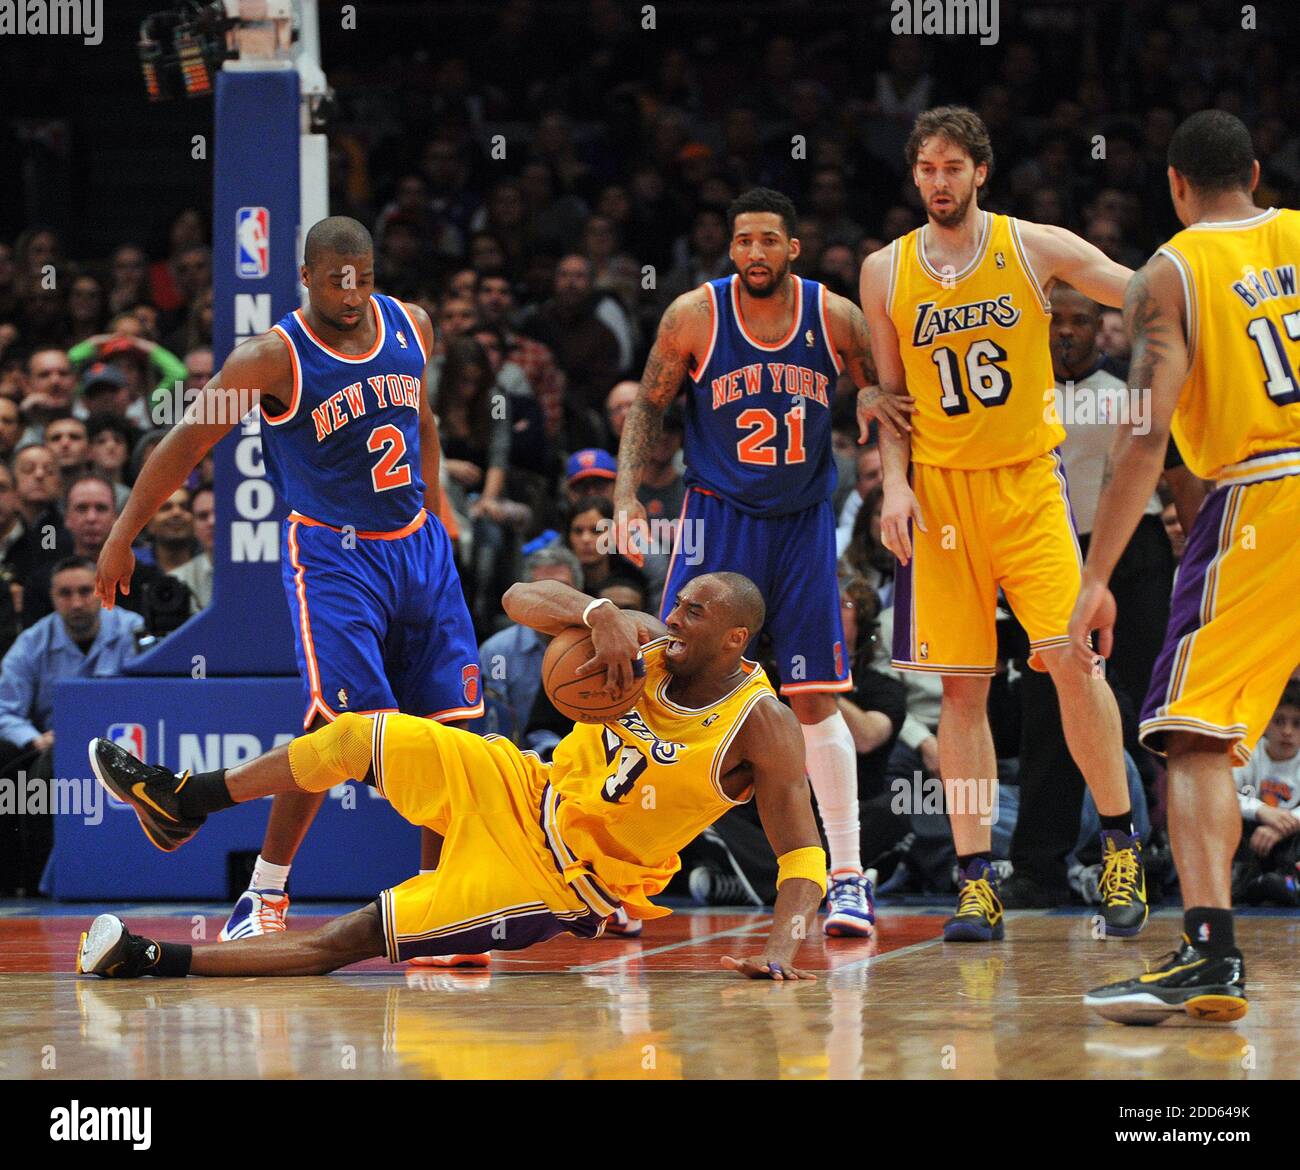 NO FILM, NO VIDEO, NO TV, NO DOCUMENTARY - Los Angeles Lakers point guard Kobe Bryant (24) falls to the court after being fouled by New York Knicks point guard Raymond Felton (2) during NBA Basketball match, New York Knicks vs Los Angeles Lakers at Madison Square Garden in New York City, USA on February 11, 2011. Los Angeles Lakers won 113-96. Photo by Christopher Pasatieri/Newsday/MCT/ABACAPRESS.COM Stock Photo